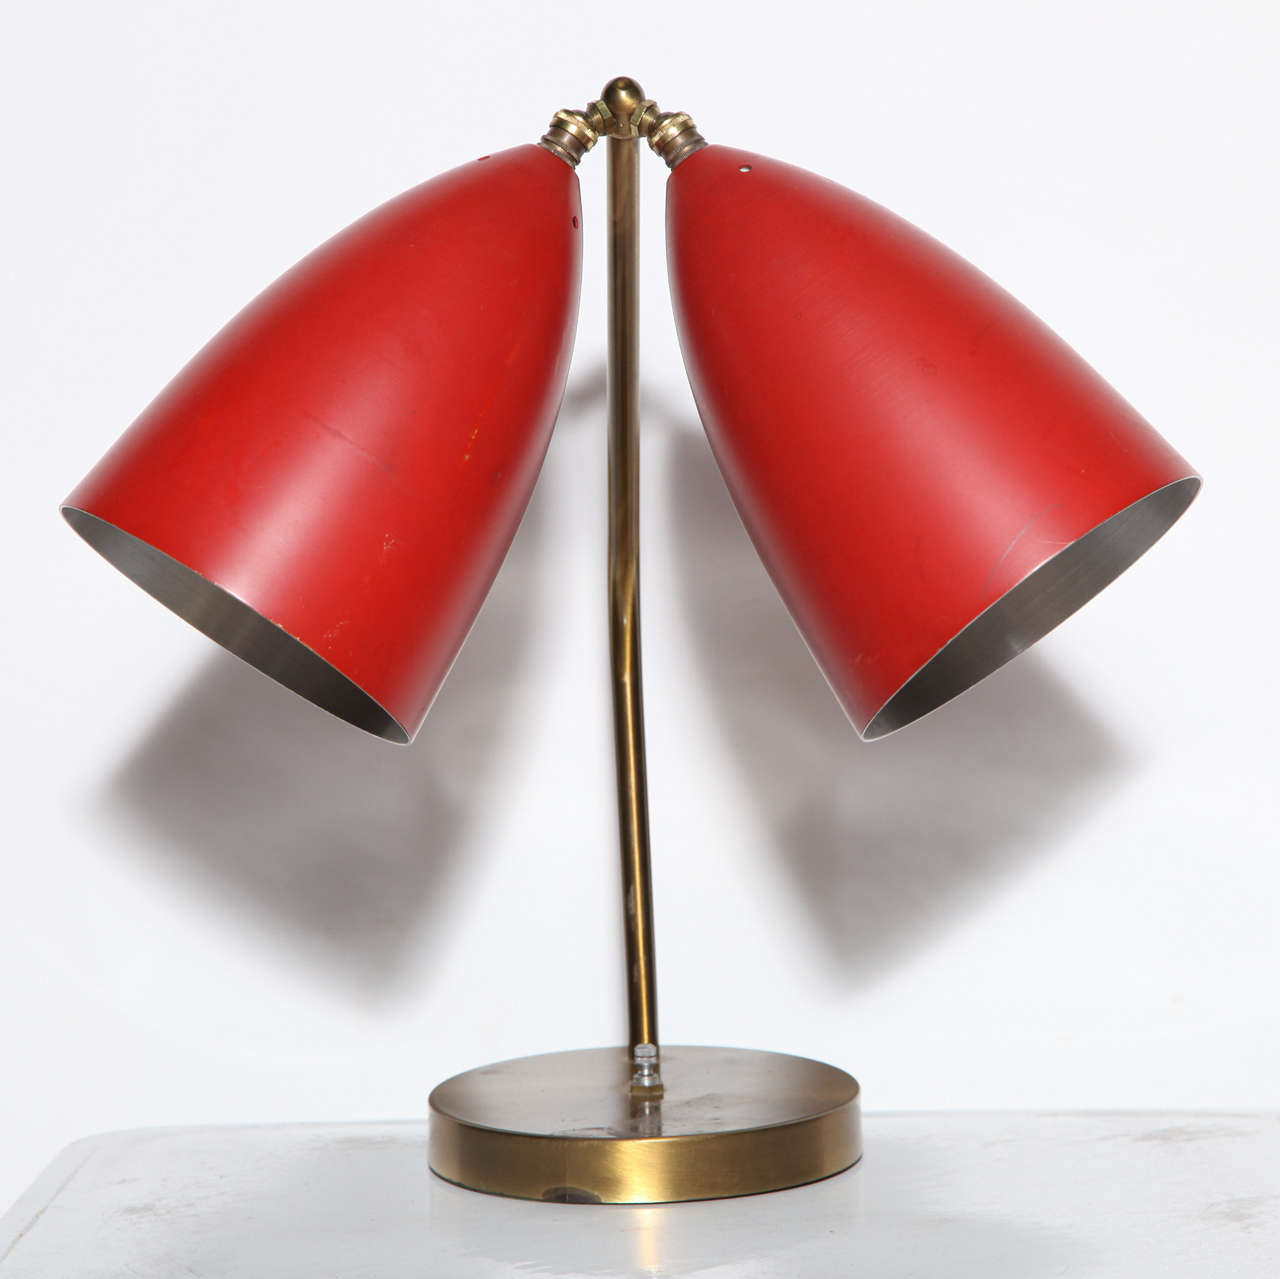 scarce Greta Grossman for Ralph O. Smith Brass Desk Lamp, Task Lamp featuring 2 Red enameled Aluminum Cone Shades (6